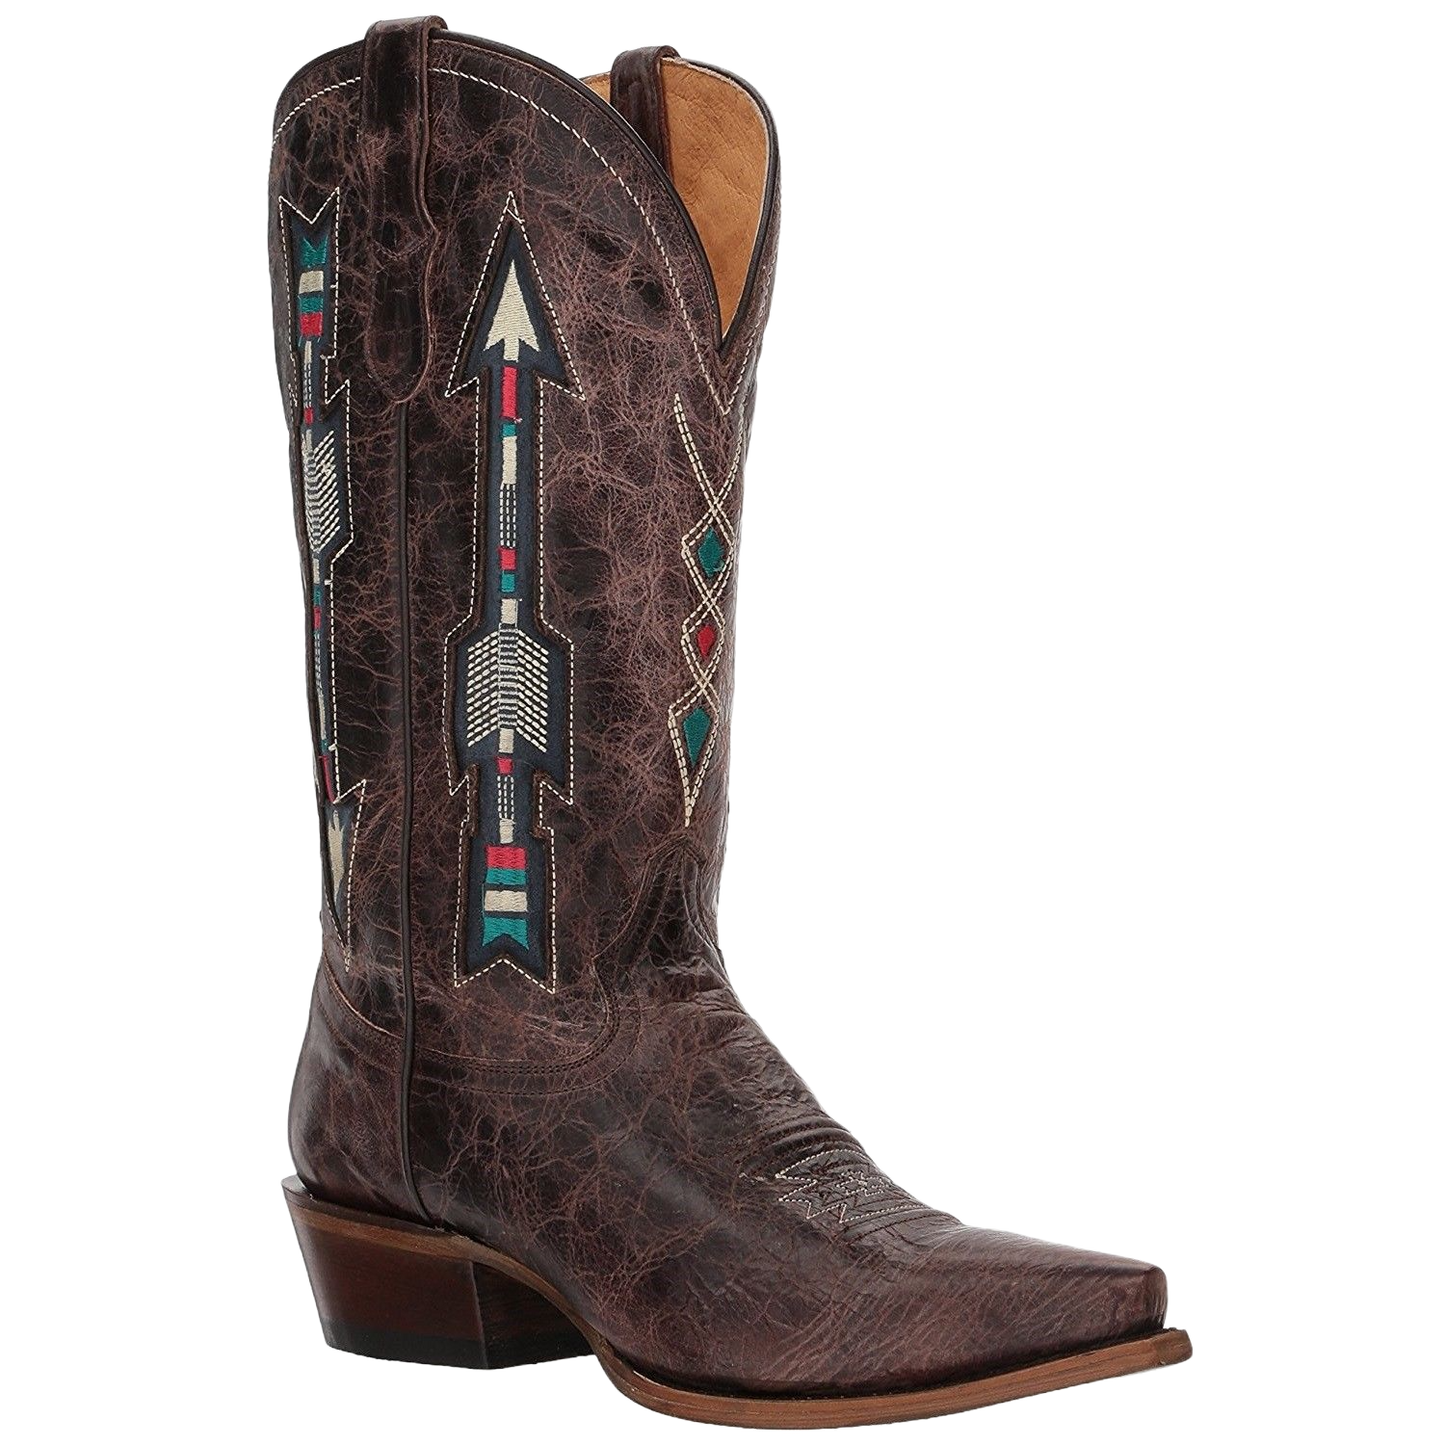 Roper Ladies Brown Embroidered Arrow Underlay Boots 09-021-8126-1426